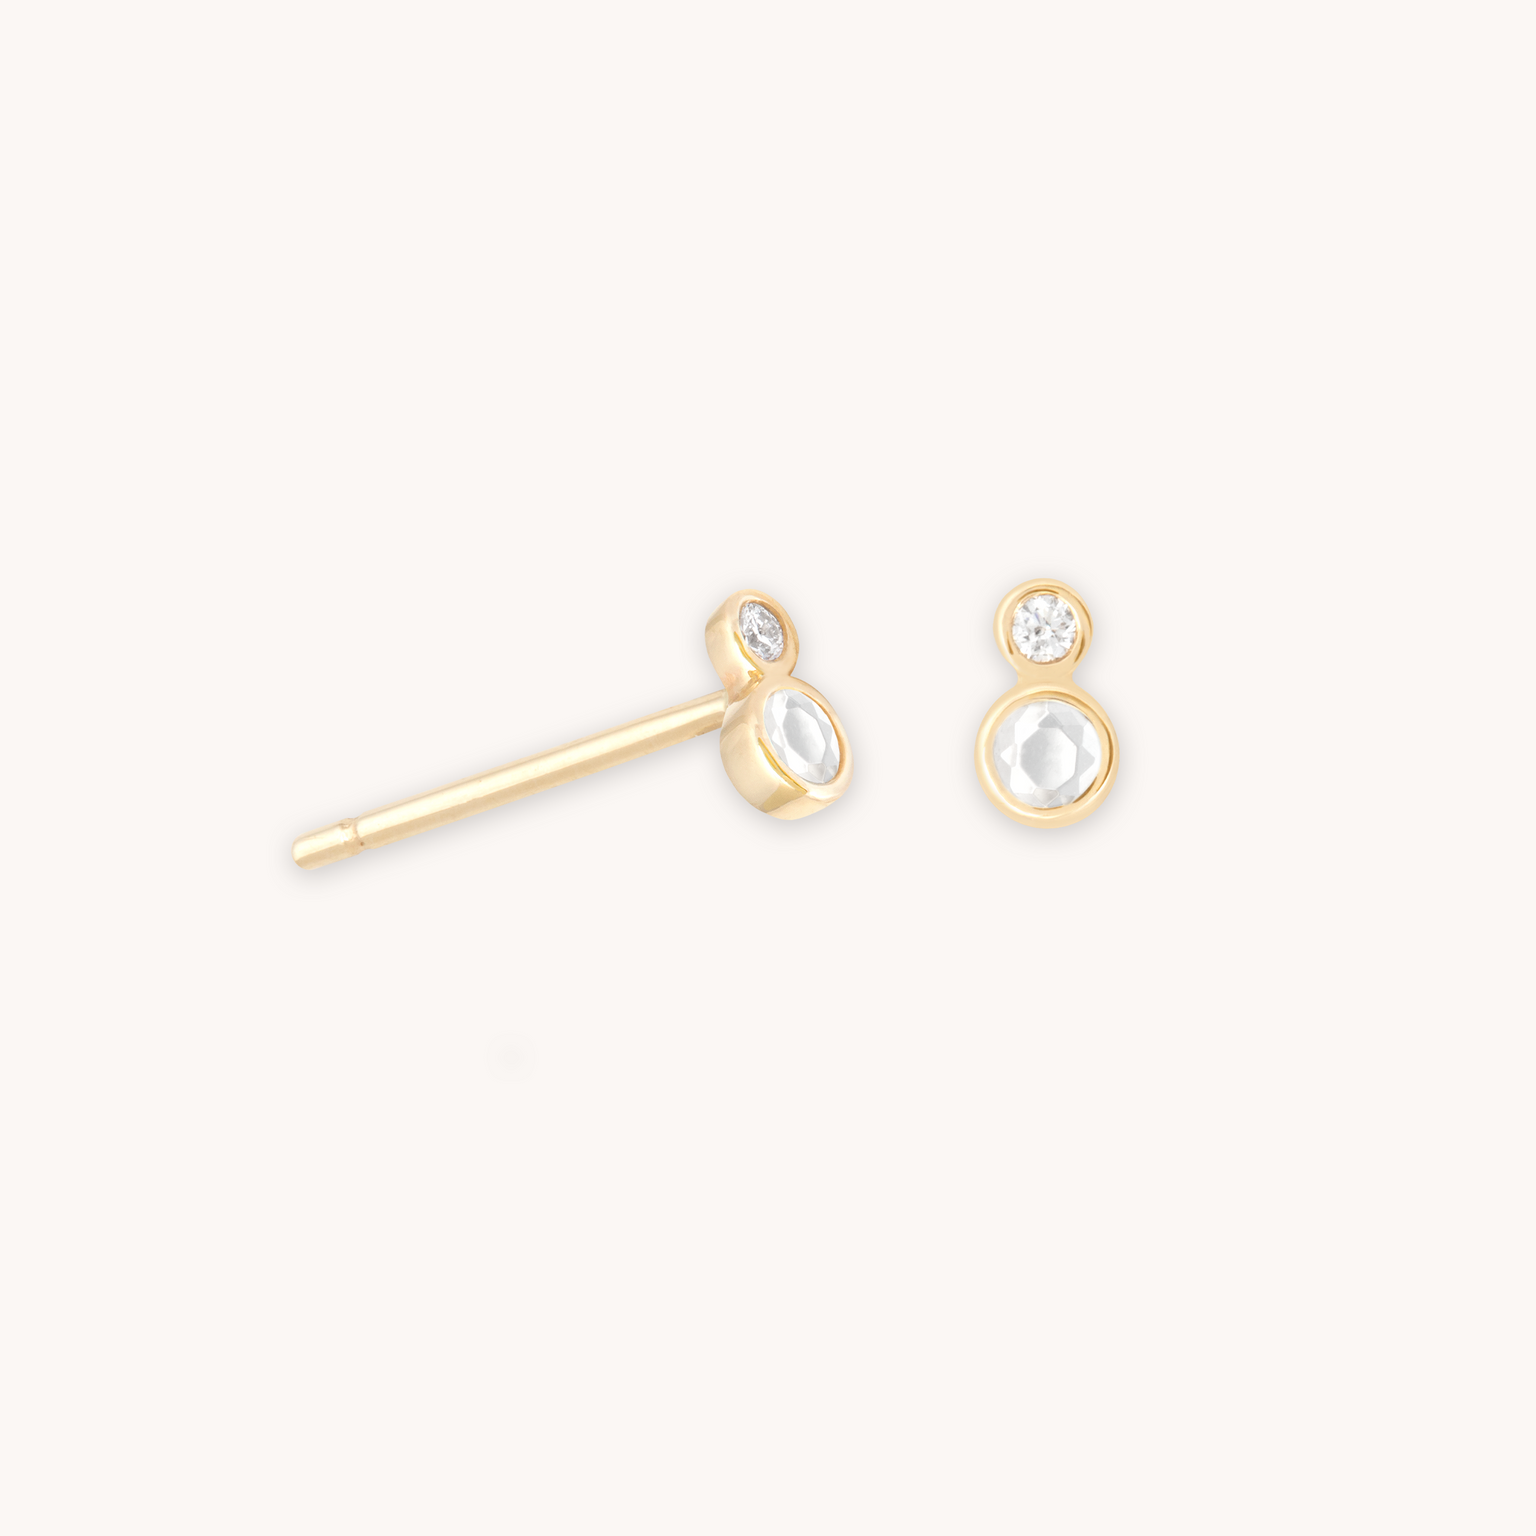 Double Topaz Stud Earrings in Solid Gold cut out